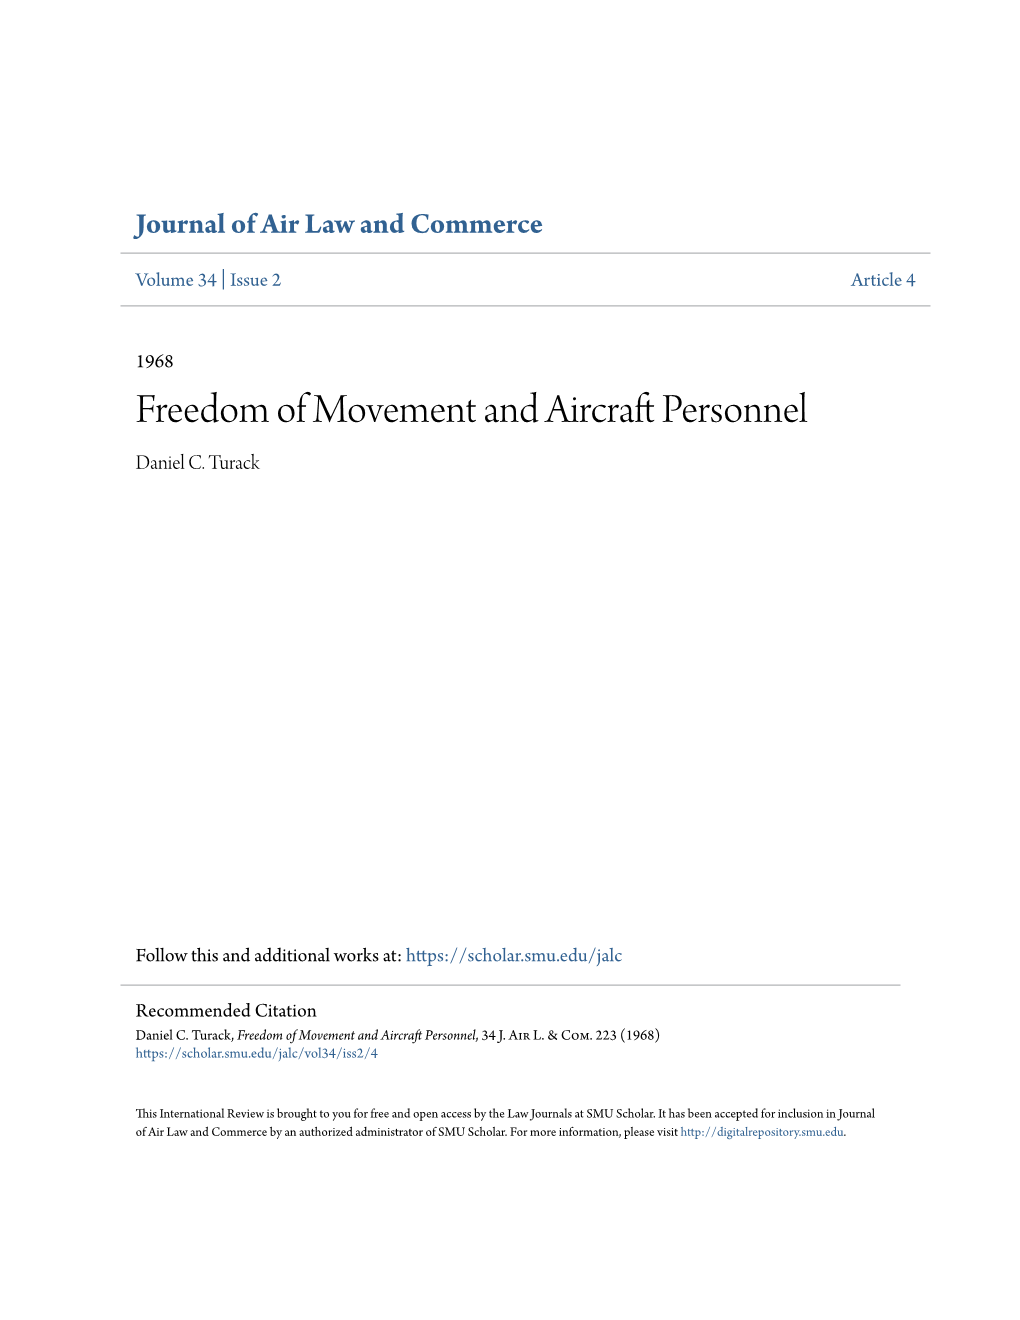 Freedom of Movement and Aircraft Personnel